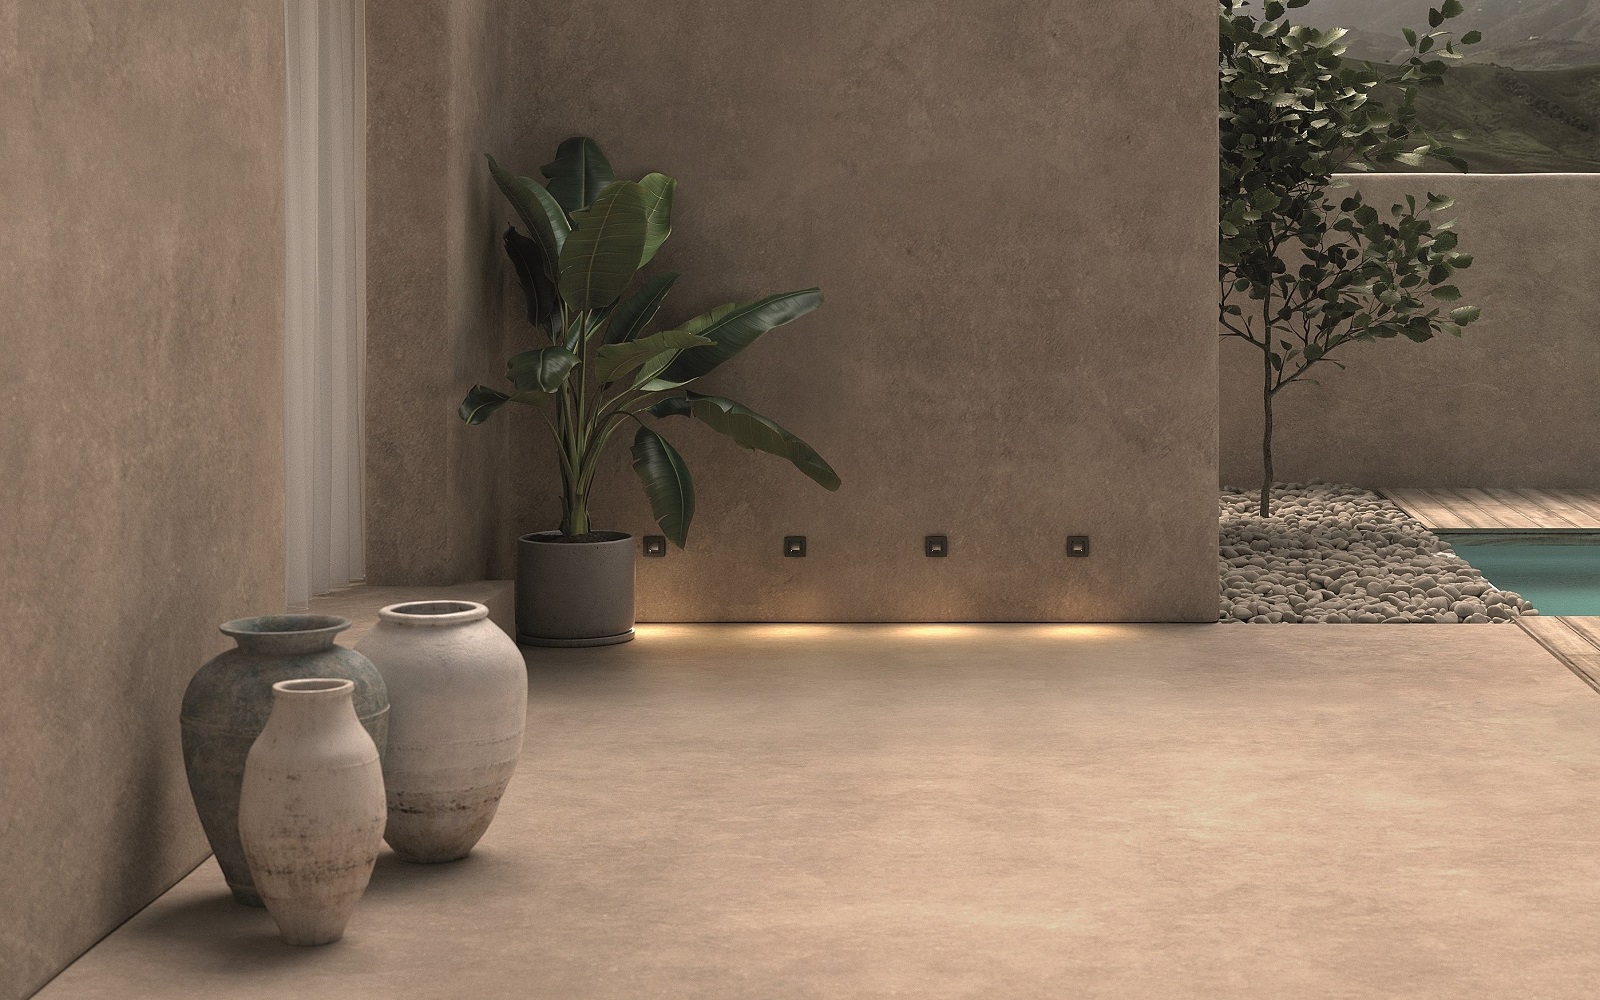 natural adobe house with terracotta pots and Click outdoor lighting from LedsC4